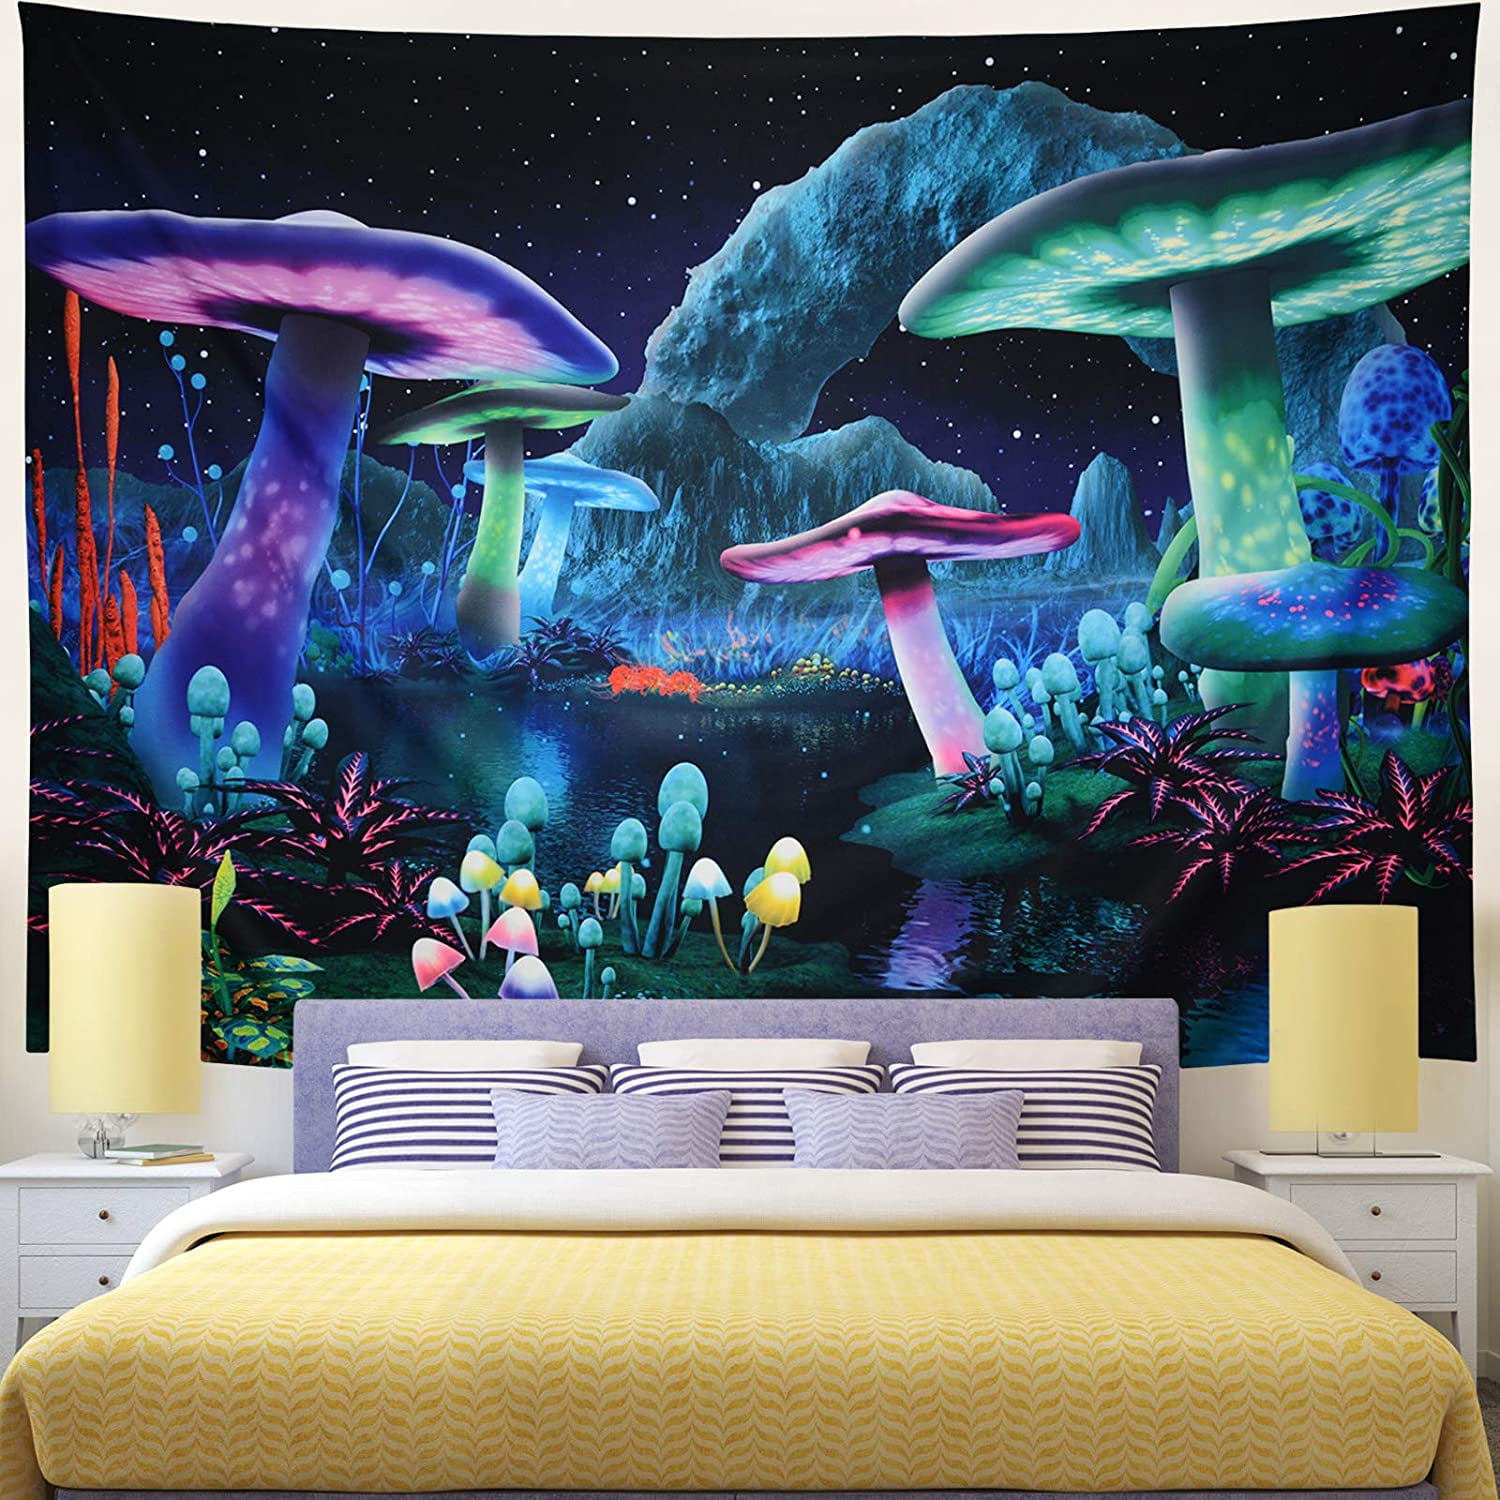 Space Station Wall Hanging Tapestry Psychedelic Bedroom Home Decoration